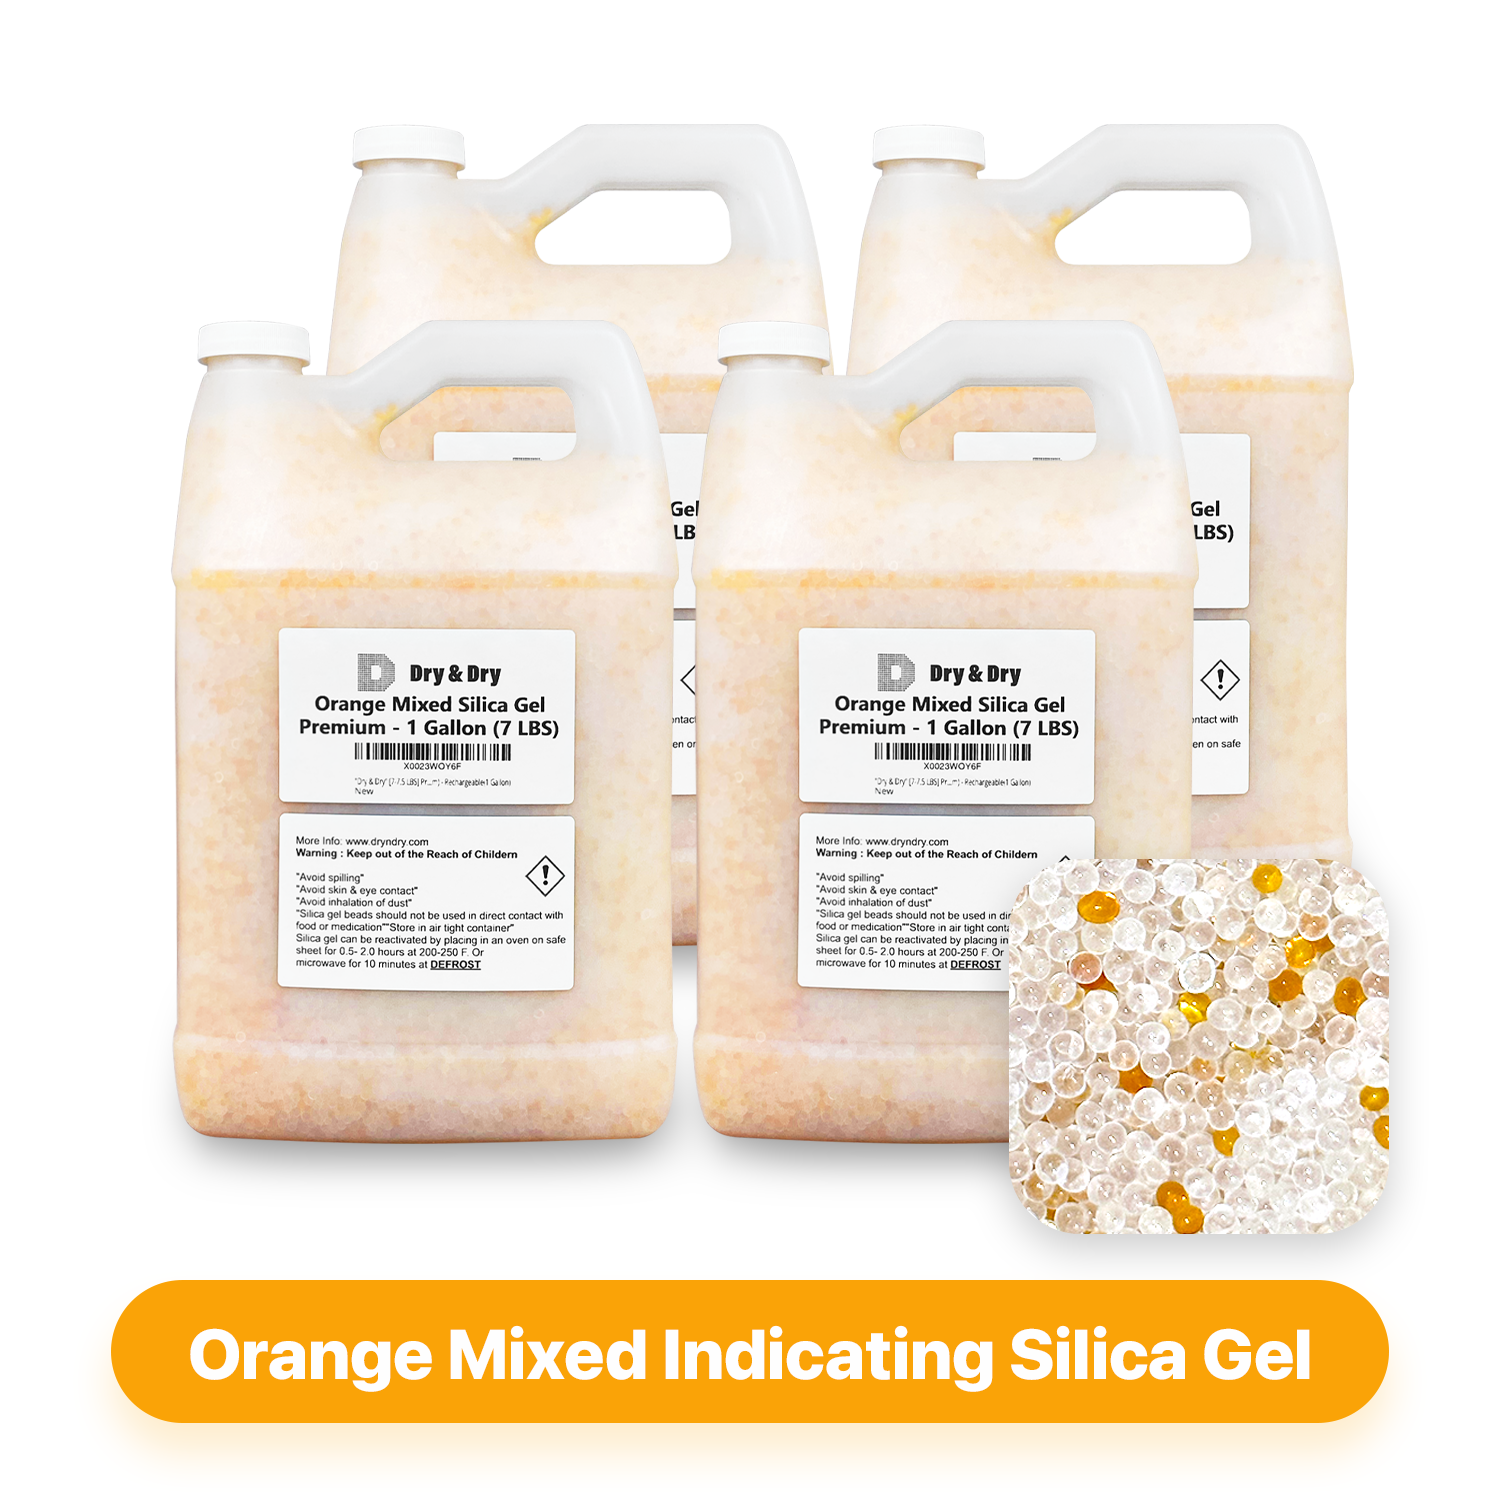 4 Gallon(28-30 LBS) "Dry & Dry" Premium Orange & White Mixed Indicating Silica Gel Desiccant Beads(Industry Standard 3-5 mm) - Rechargeable